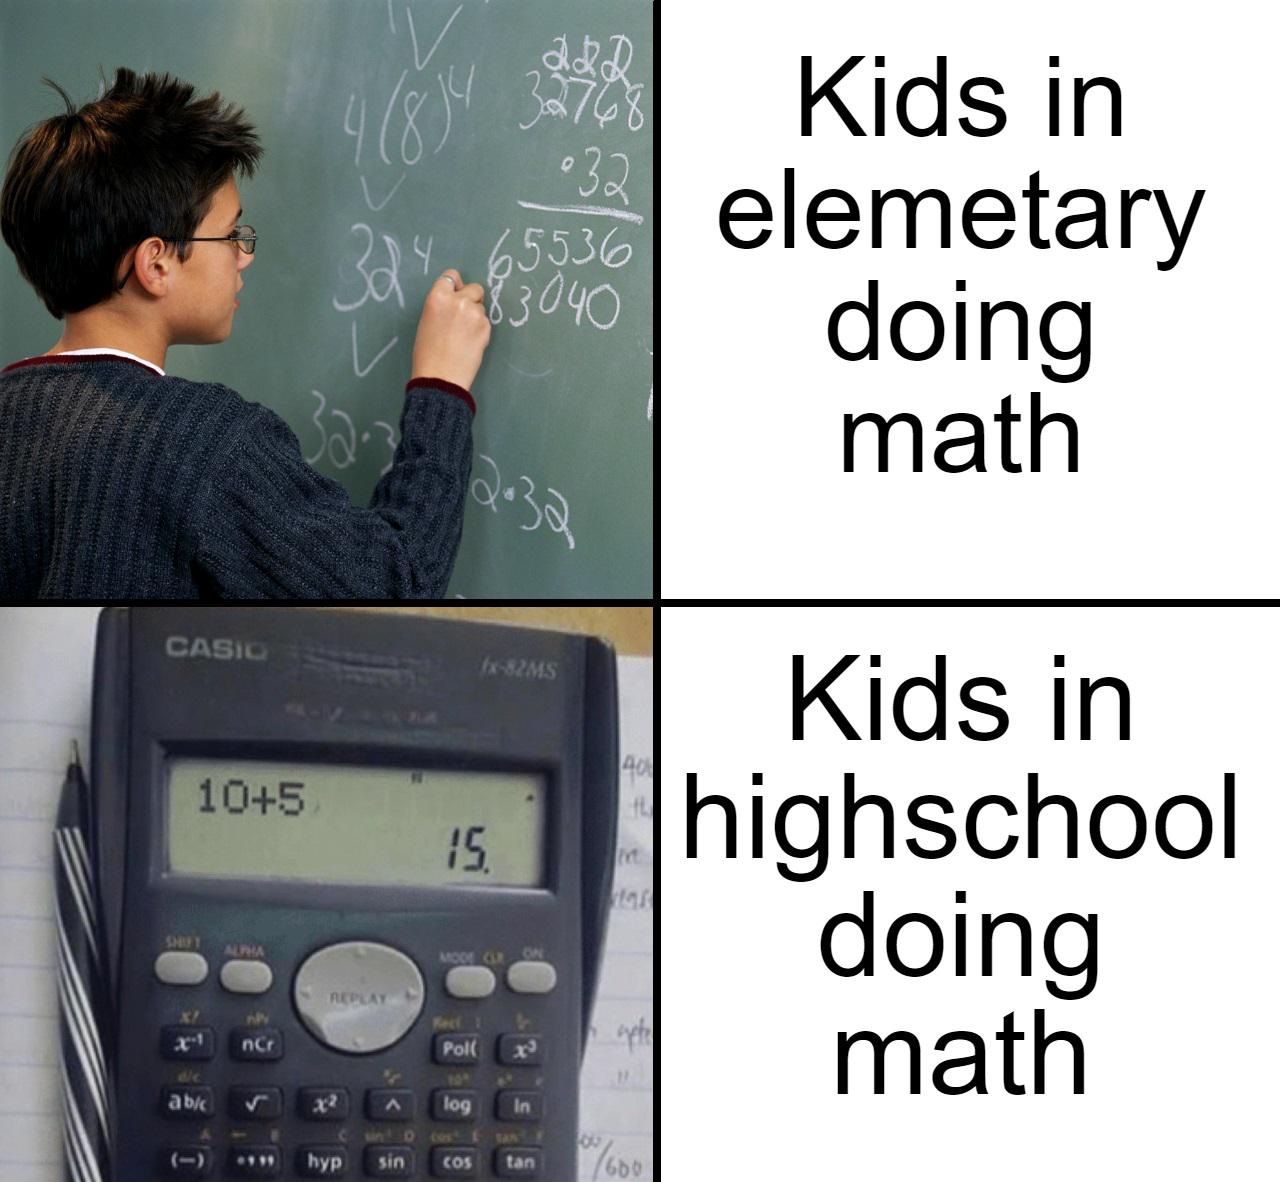 funny memes - communication - 1968 19 32% 65536 903 232 Kids in elemetary doing math 83040 32. 2032 Casic Ex32MS 105 S it Kids in highschool doing math Alla Mon Replay Rece Poll sple ncr r 1 aby log In 00 hyp sin Cos tan